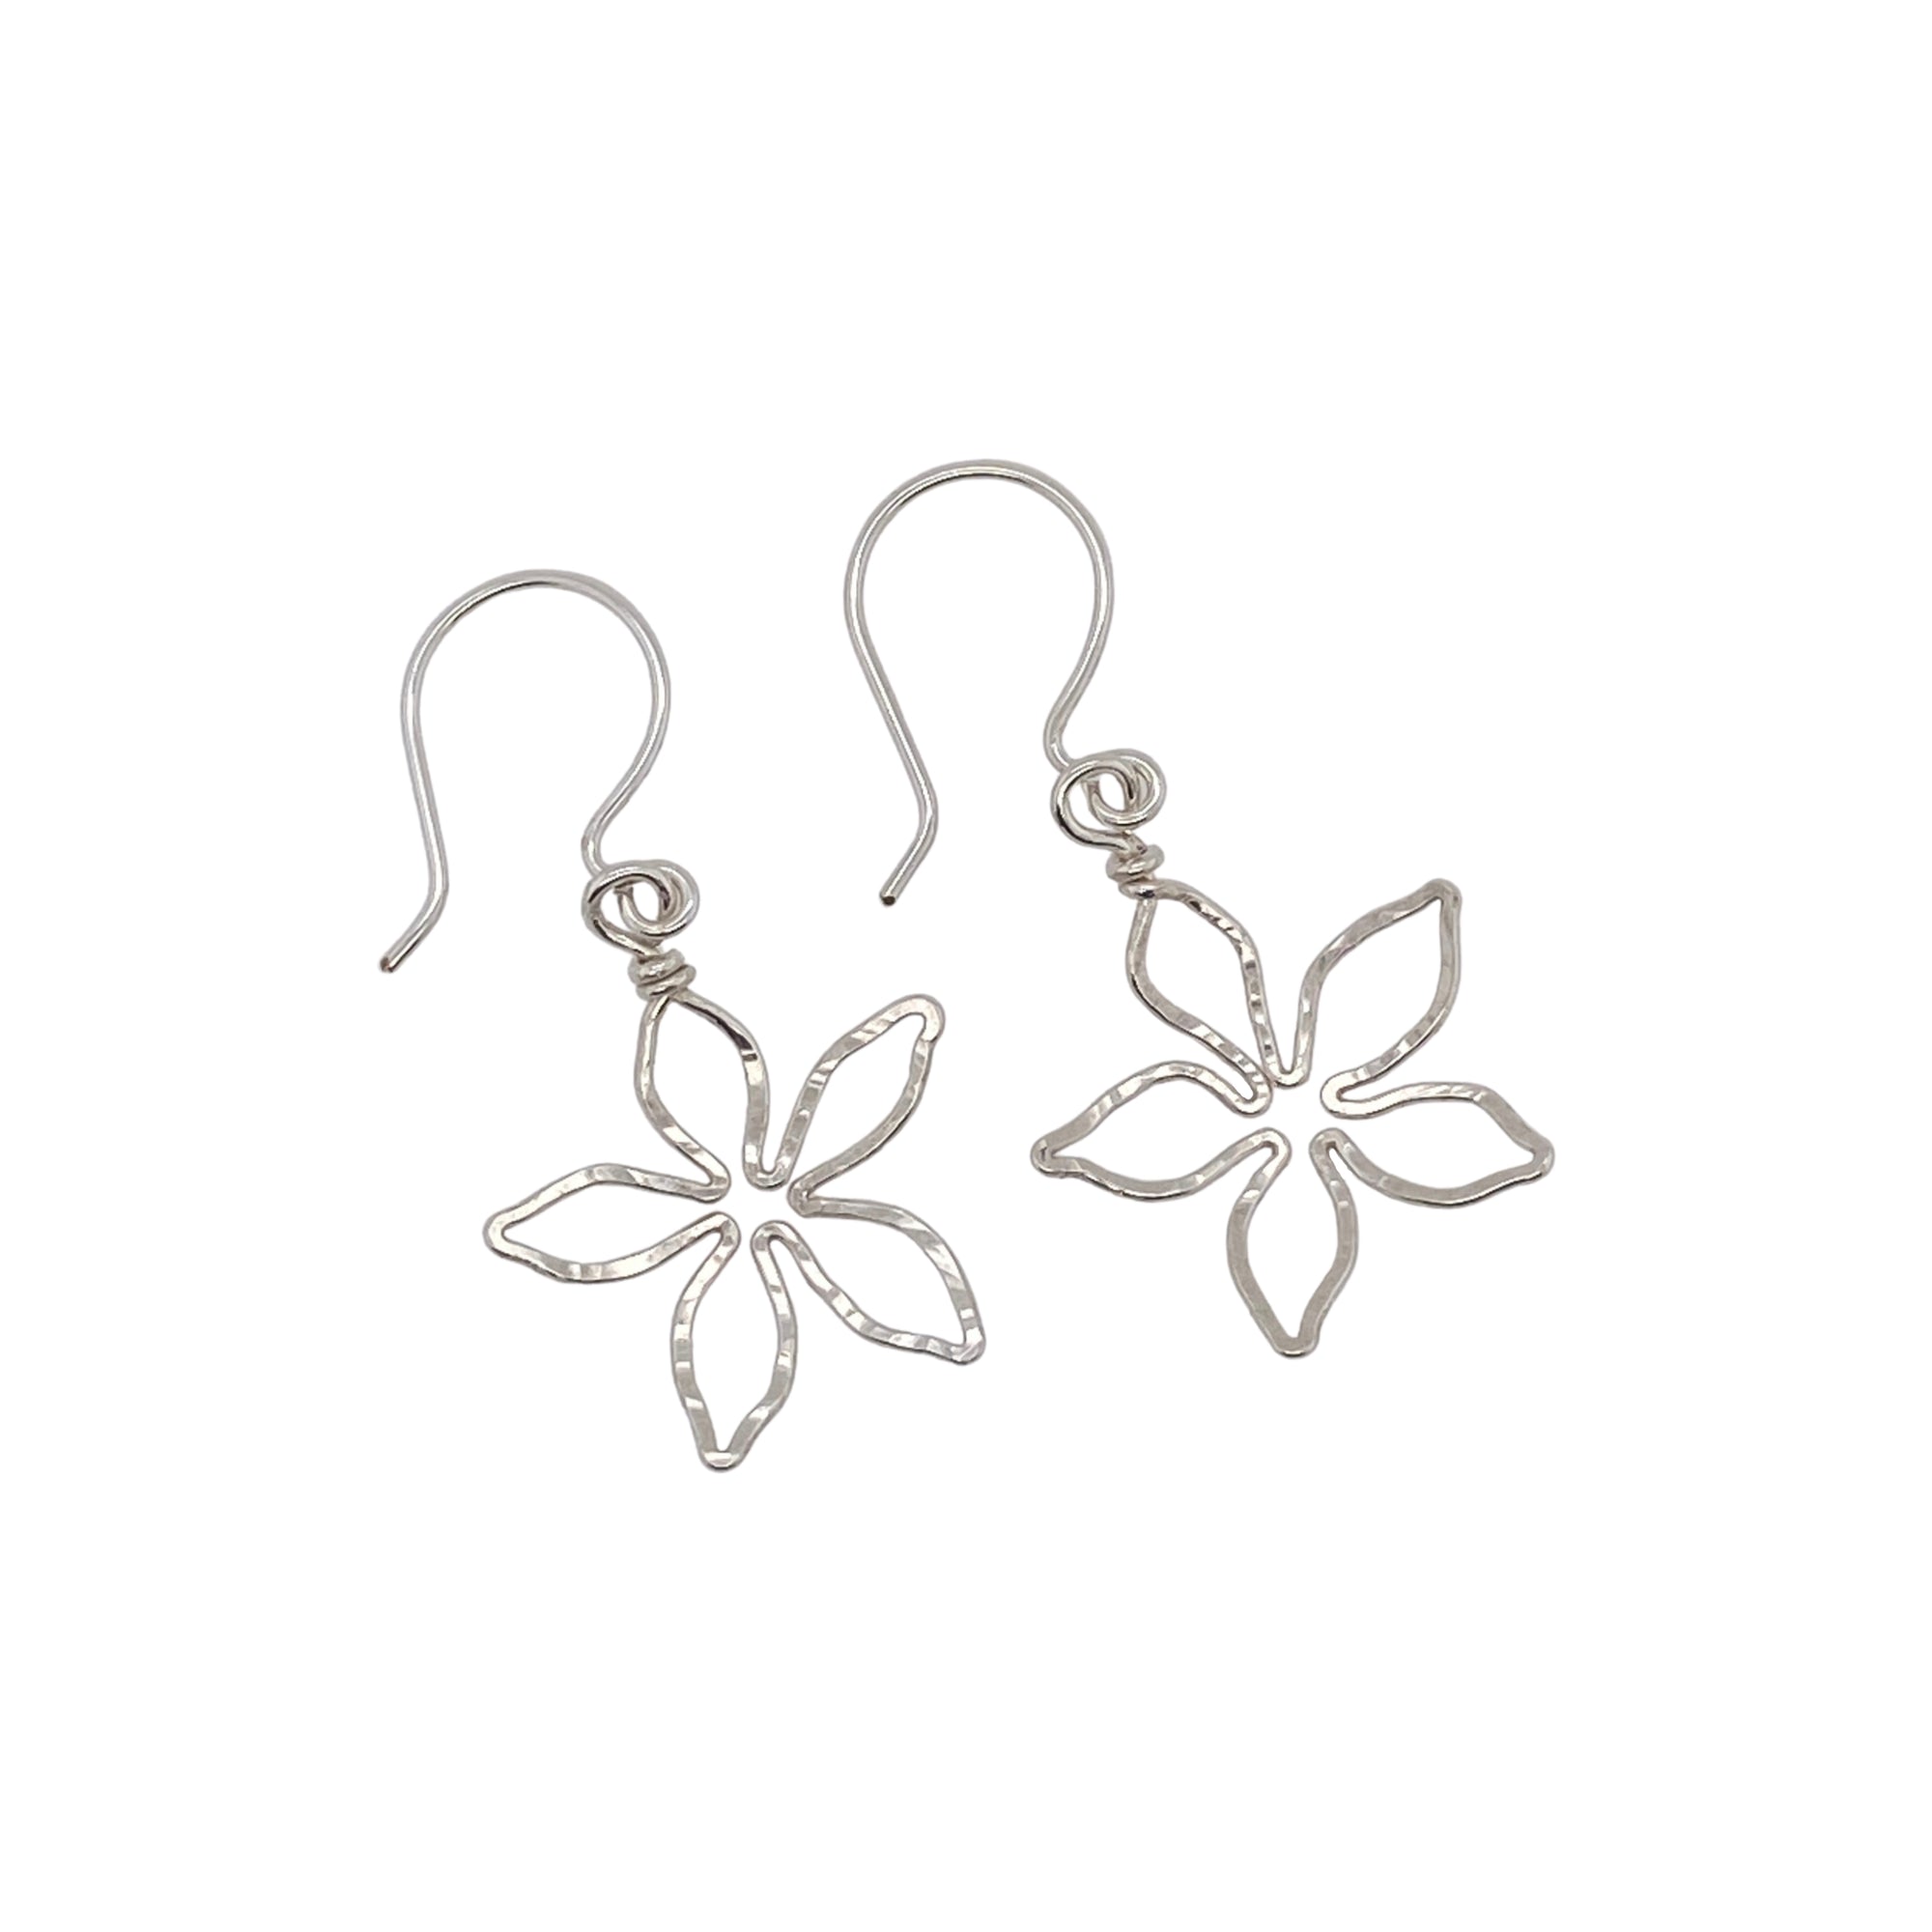 Camille Patton Violet 5 Petal Wire Jewelry Earrings S01